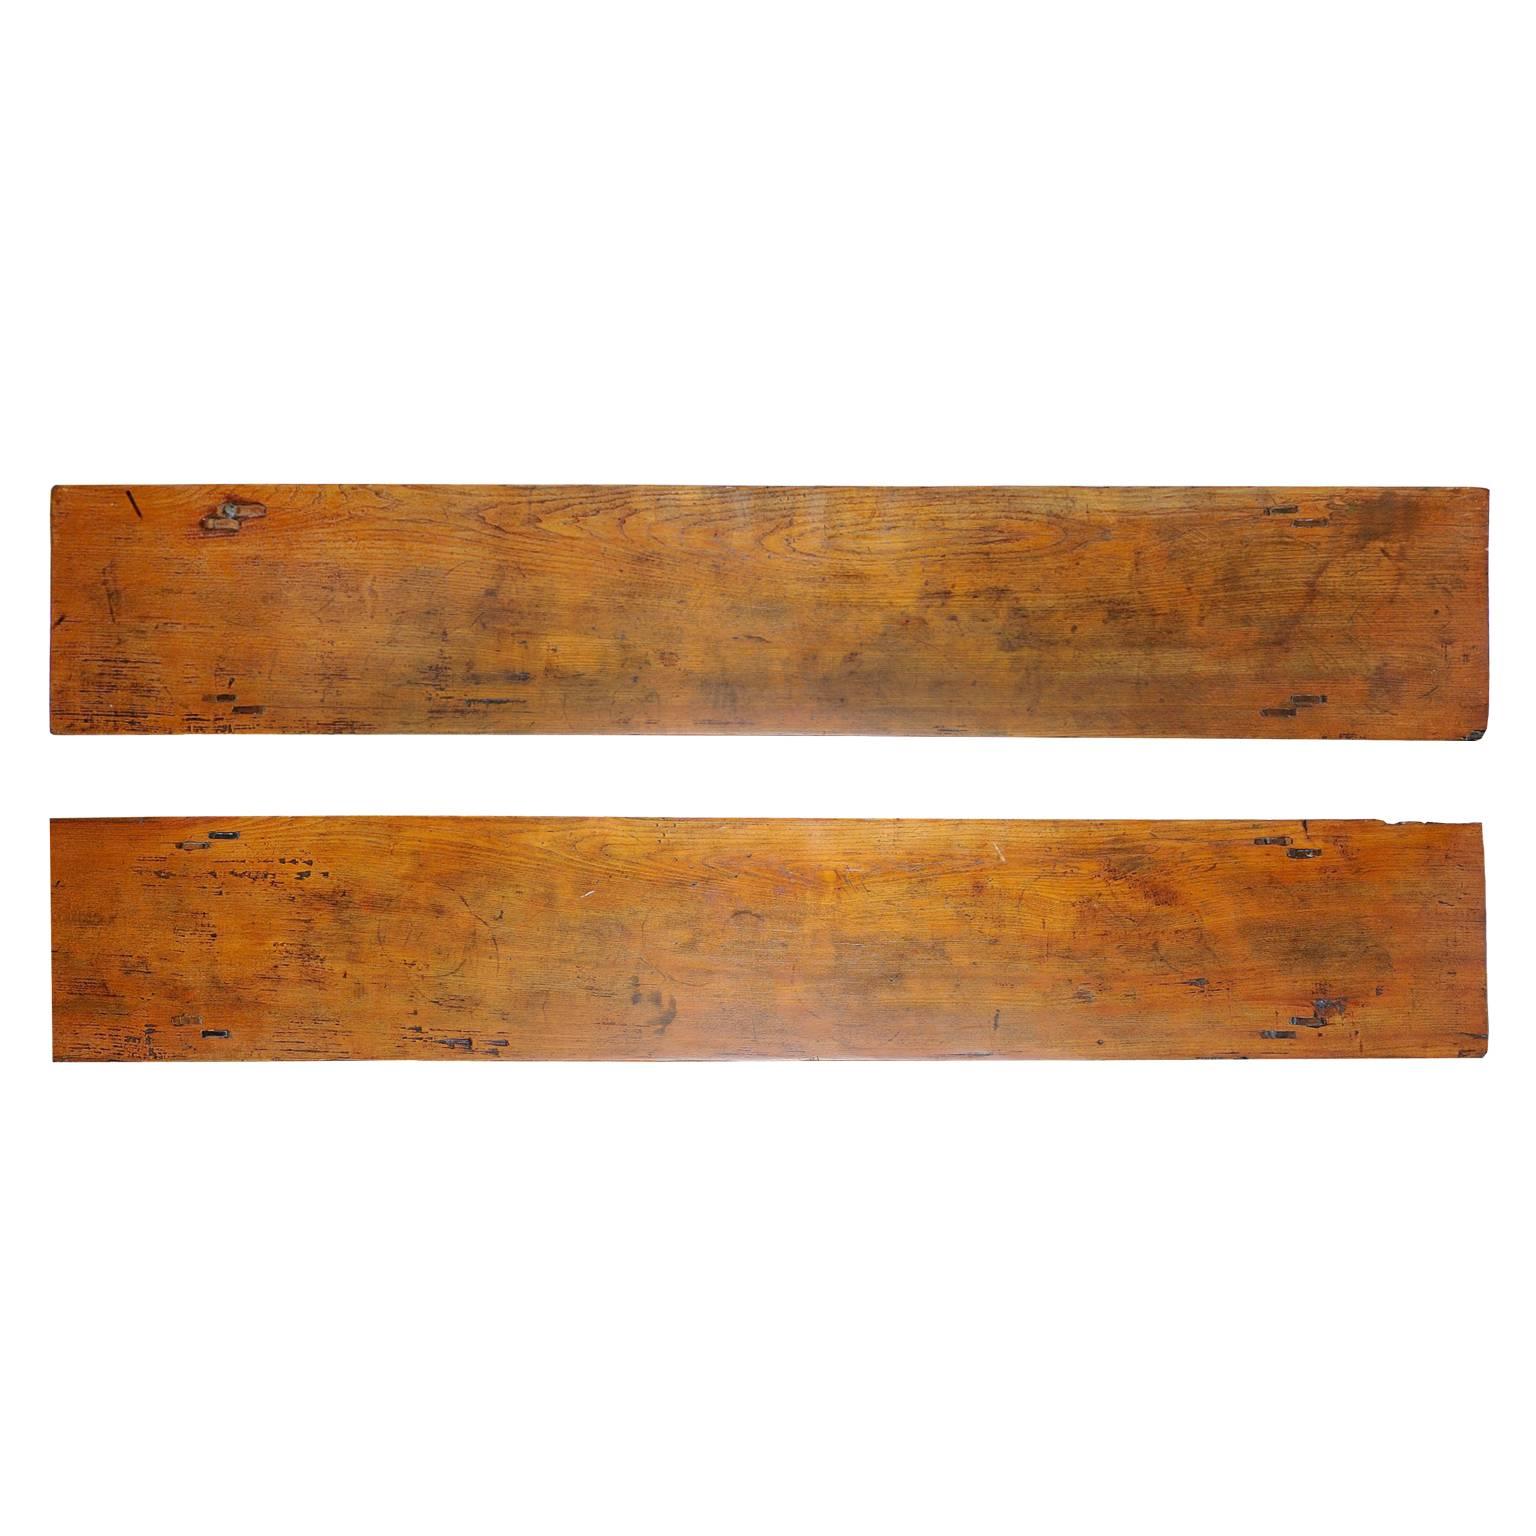 This is a wonderful pair of well-proportioned Provincial Chinese rustic elm benches or window seats, highly suitable as kitchen or hall benches, circa 1820.
 